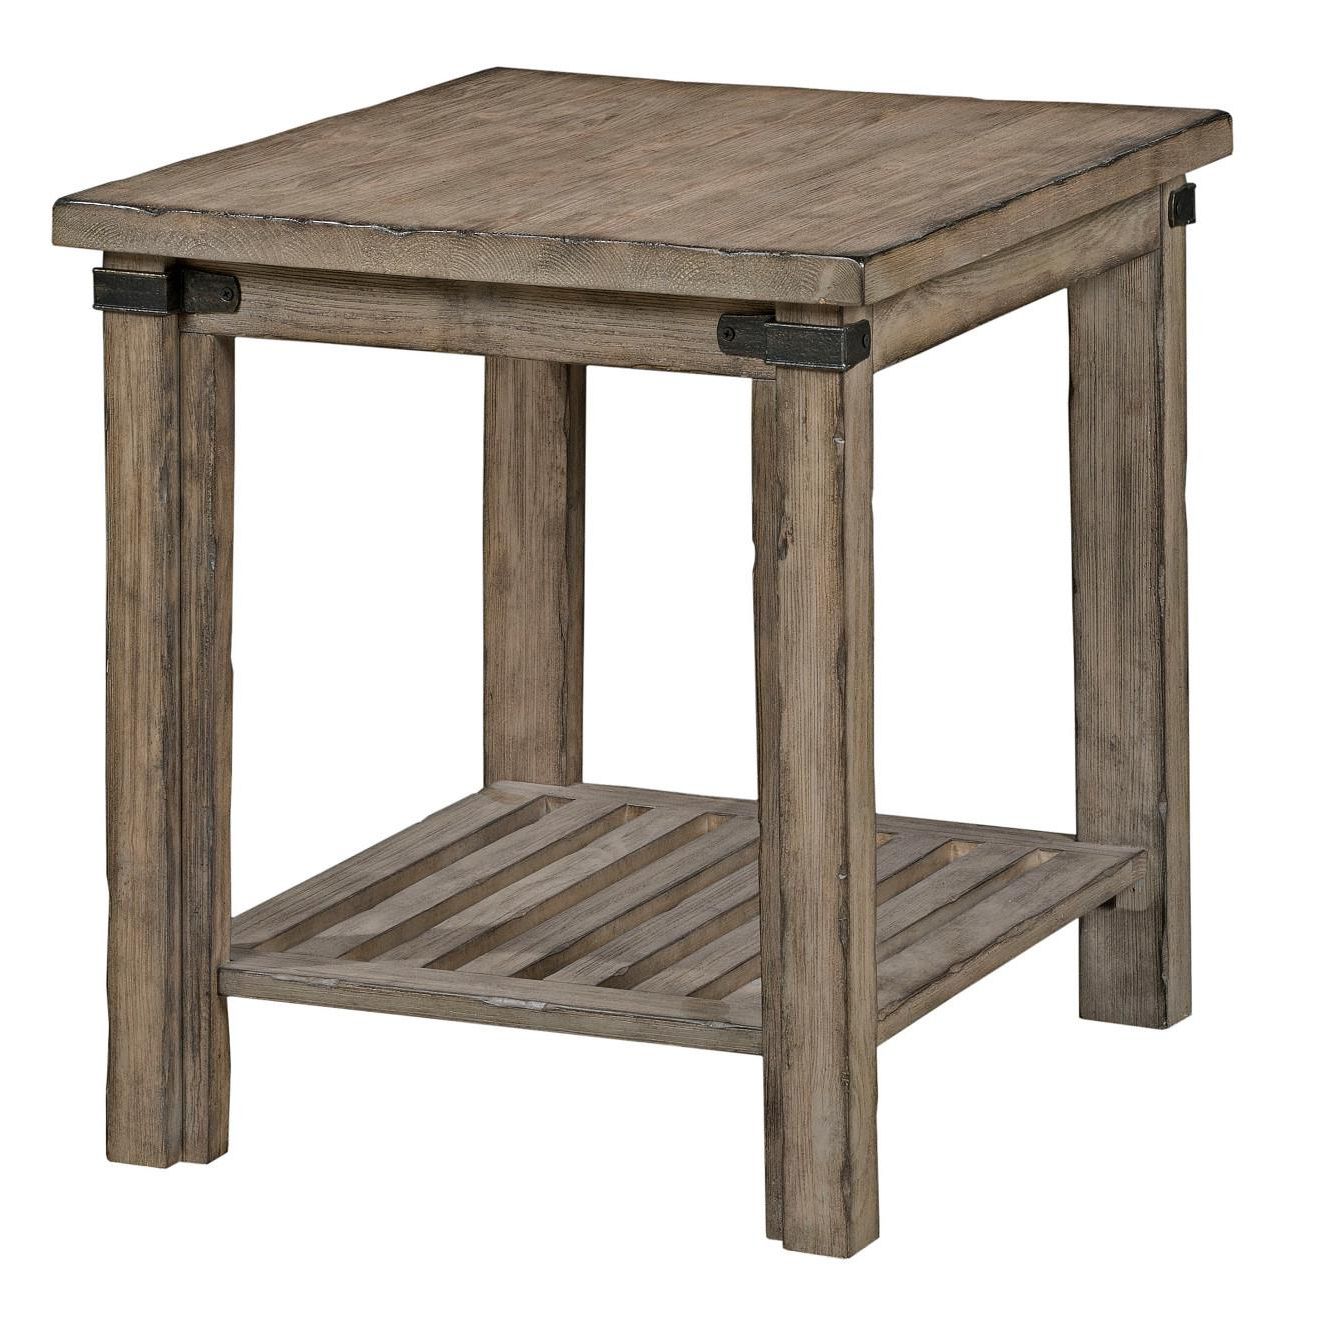 Kincaid Furniture Foundry Rustic Weathered Gray End Table | Johnny Inside Rustic Gray End Tables (Gallery 5 of 20)